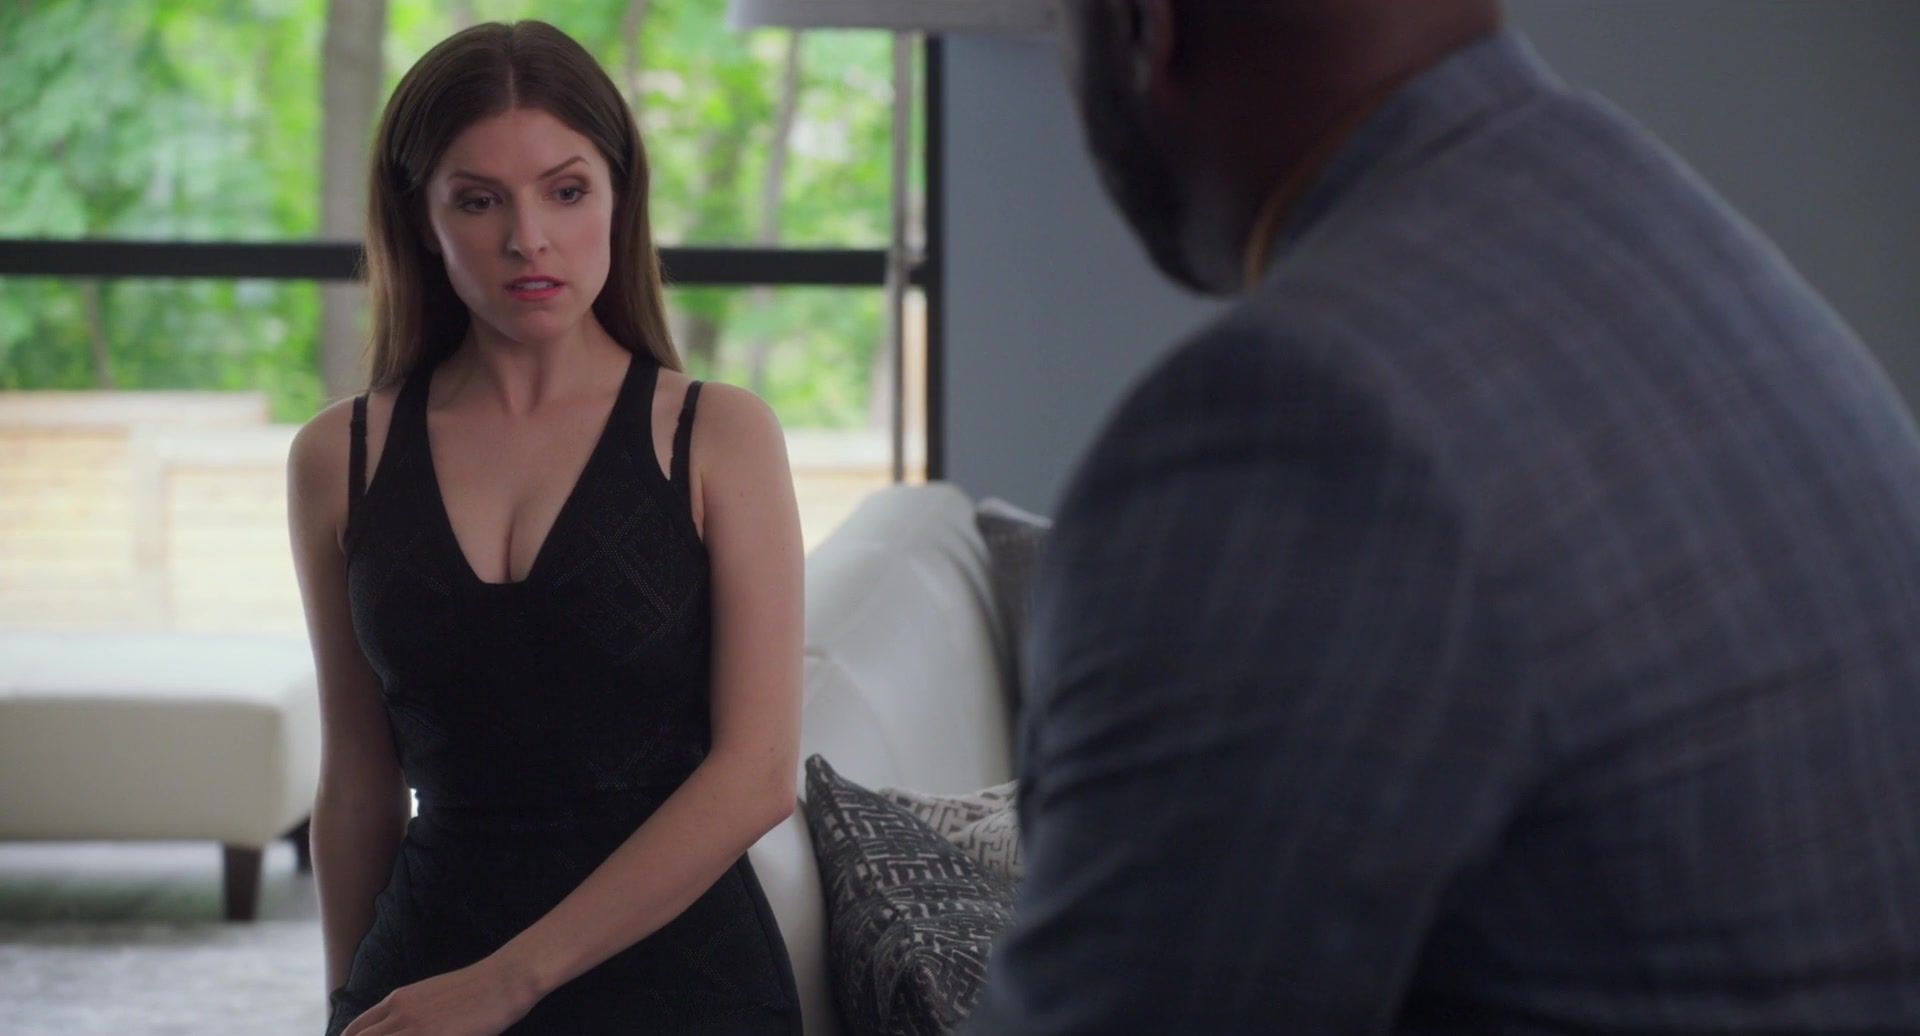 Her Anna Kendrick, Blake Lively nude - A Simple Favor (2018) Behind - 1